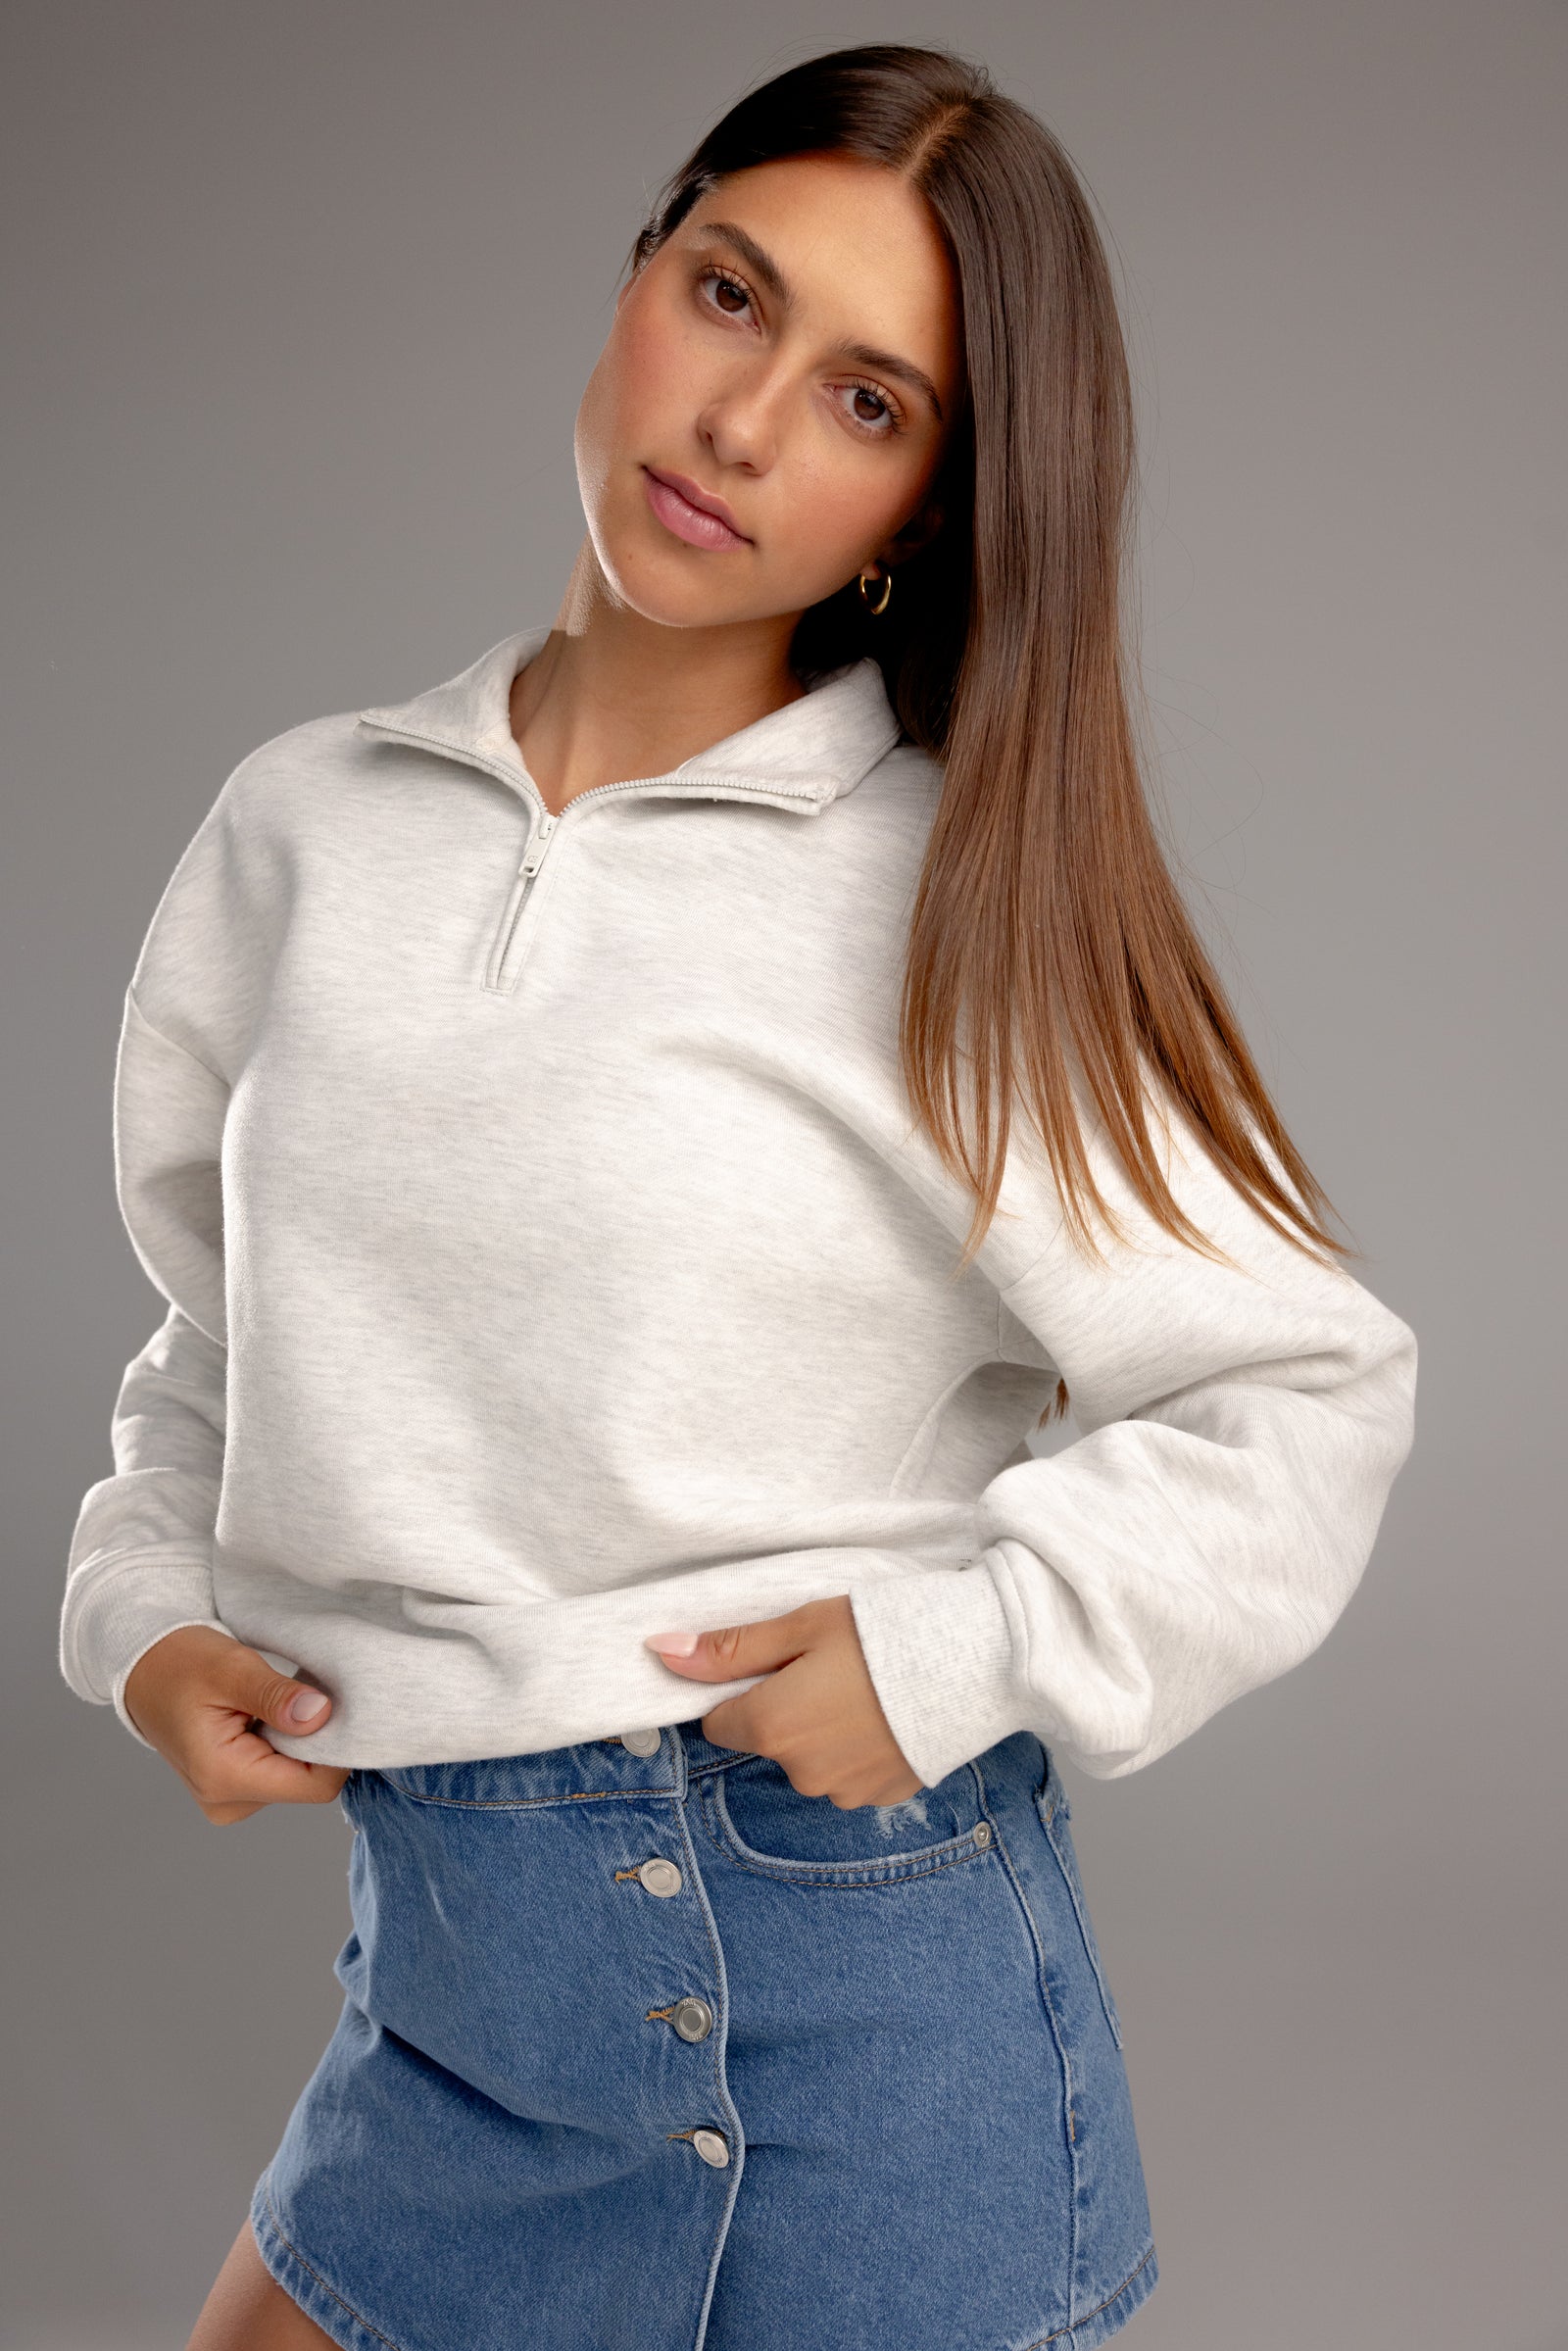 Heather Grey CityScape Quarter Zip. The quarter zip is being worn by a female model. The model is wearing an accompanying jean skirt to complete the look of the quarter zip. The photo was taken with a grey background. 